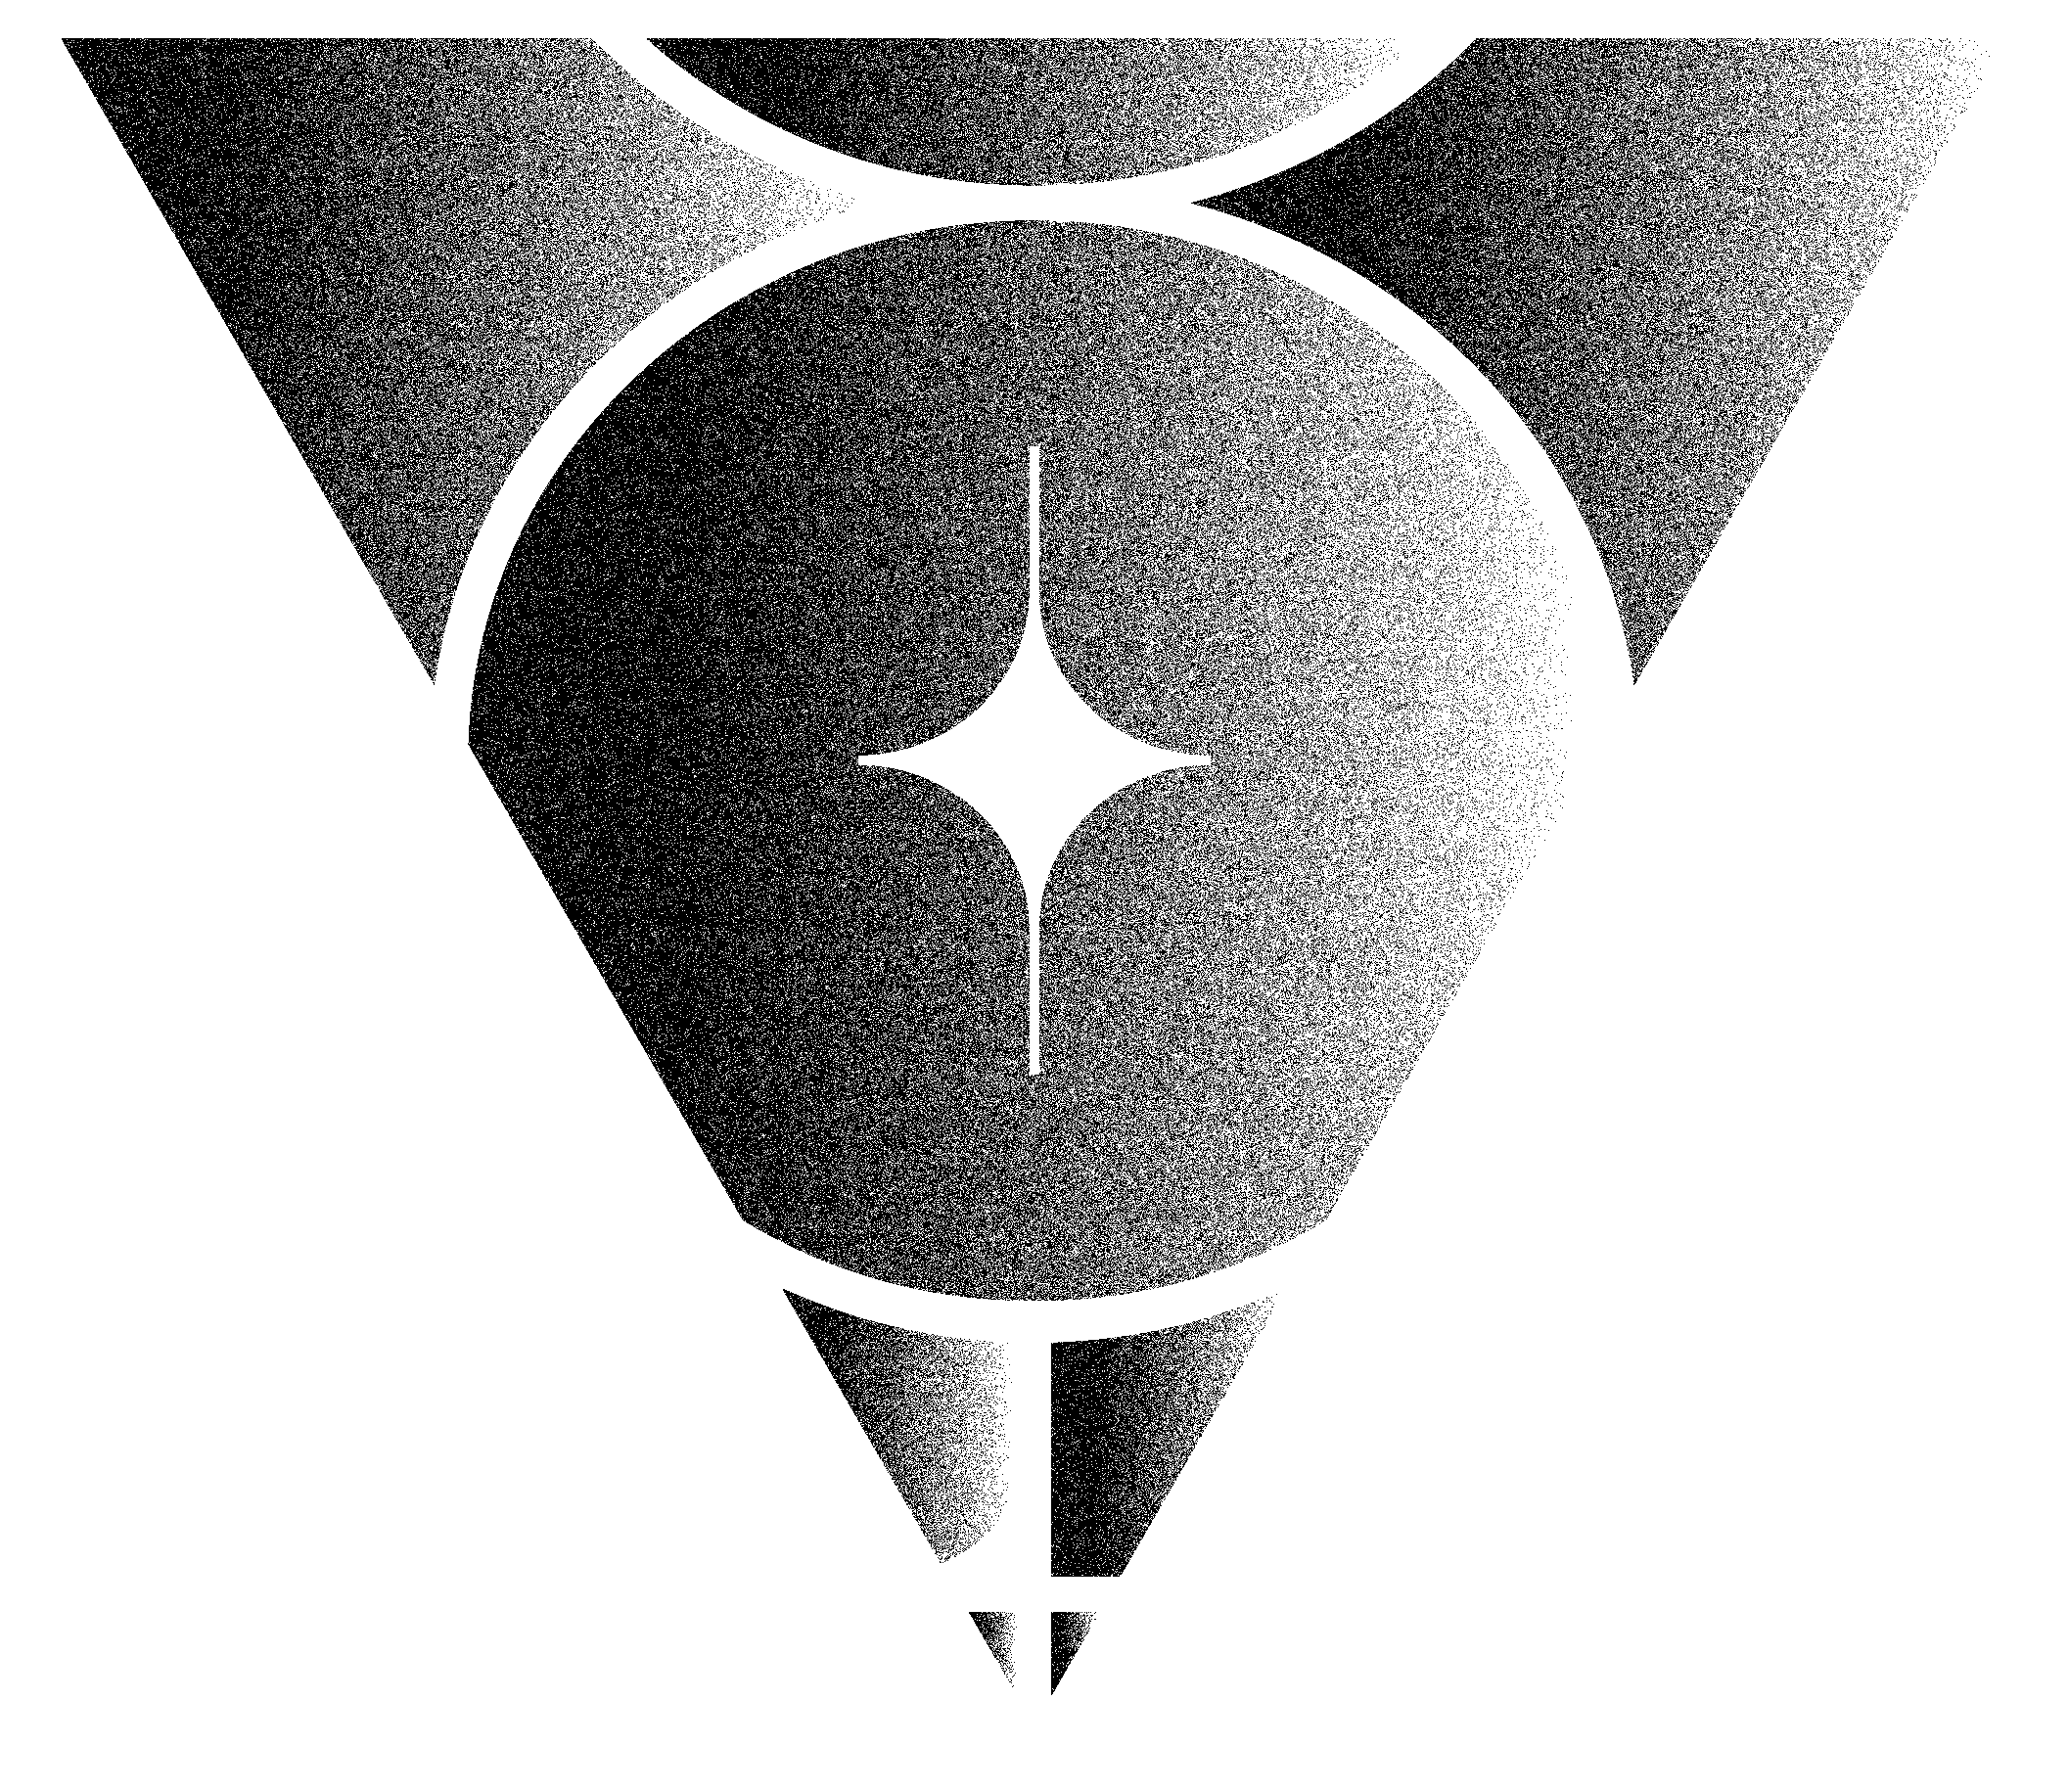 Black and White Grainey Upside Down Pyramid Face with Circular Patterns overlayed in White